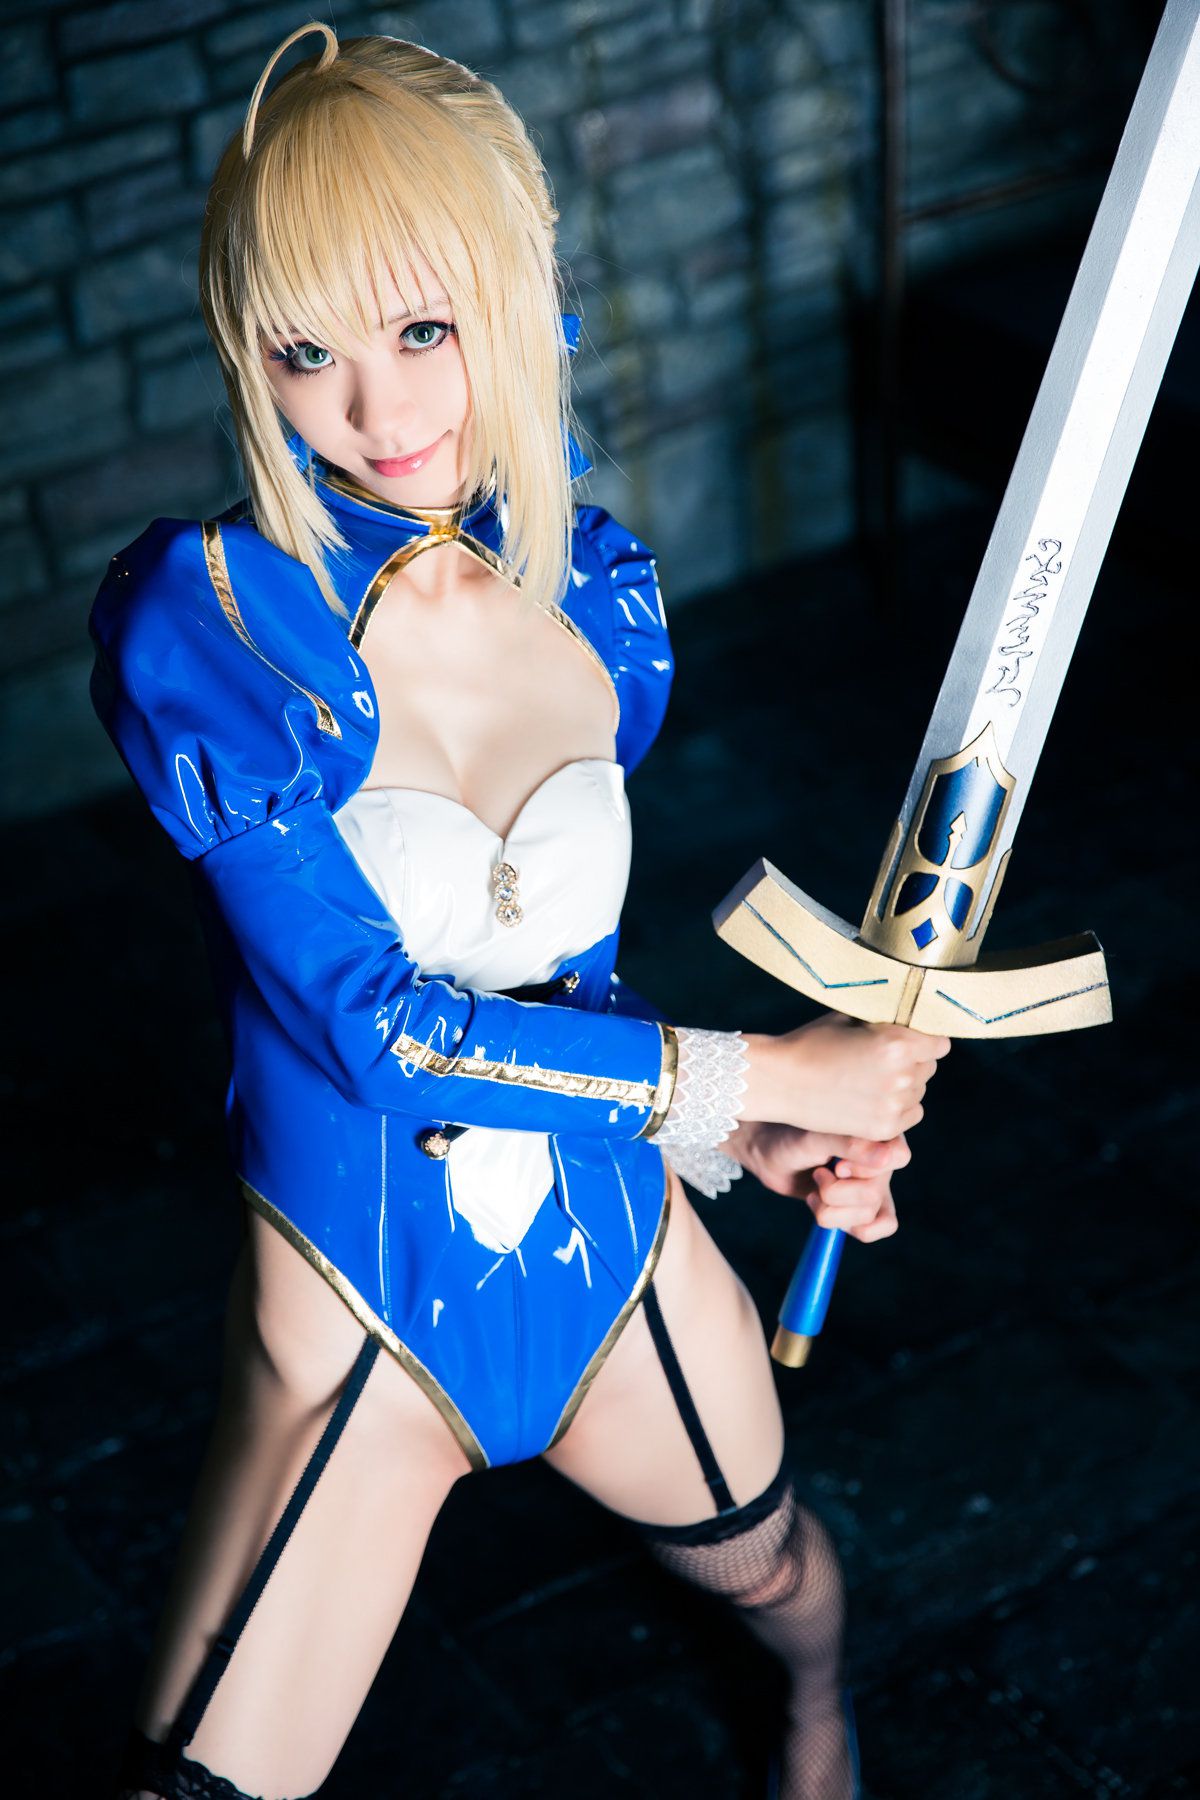 Mike(ミケ) 《Fate stay night》Saber [Mikehouse] 写真集 23